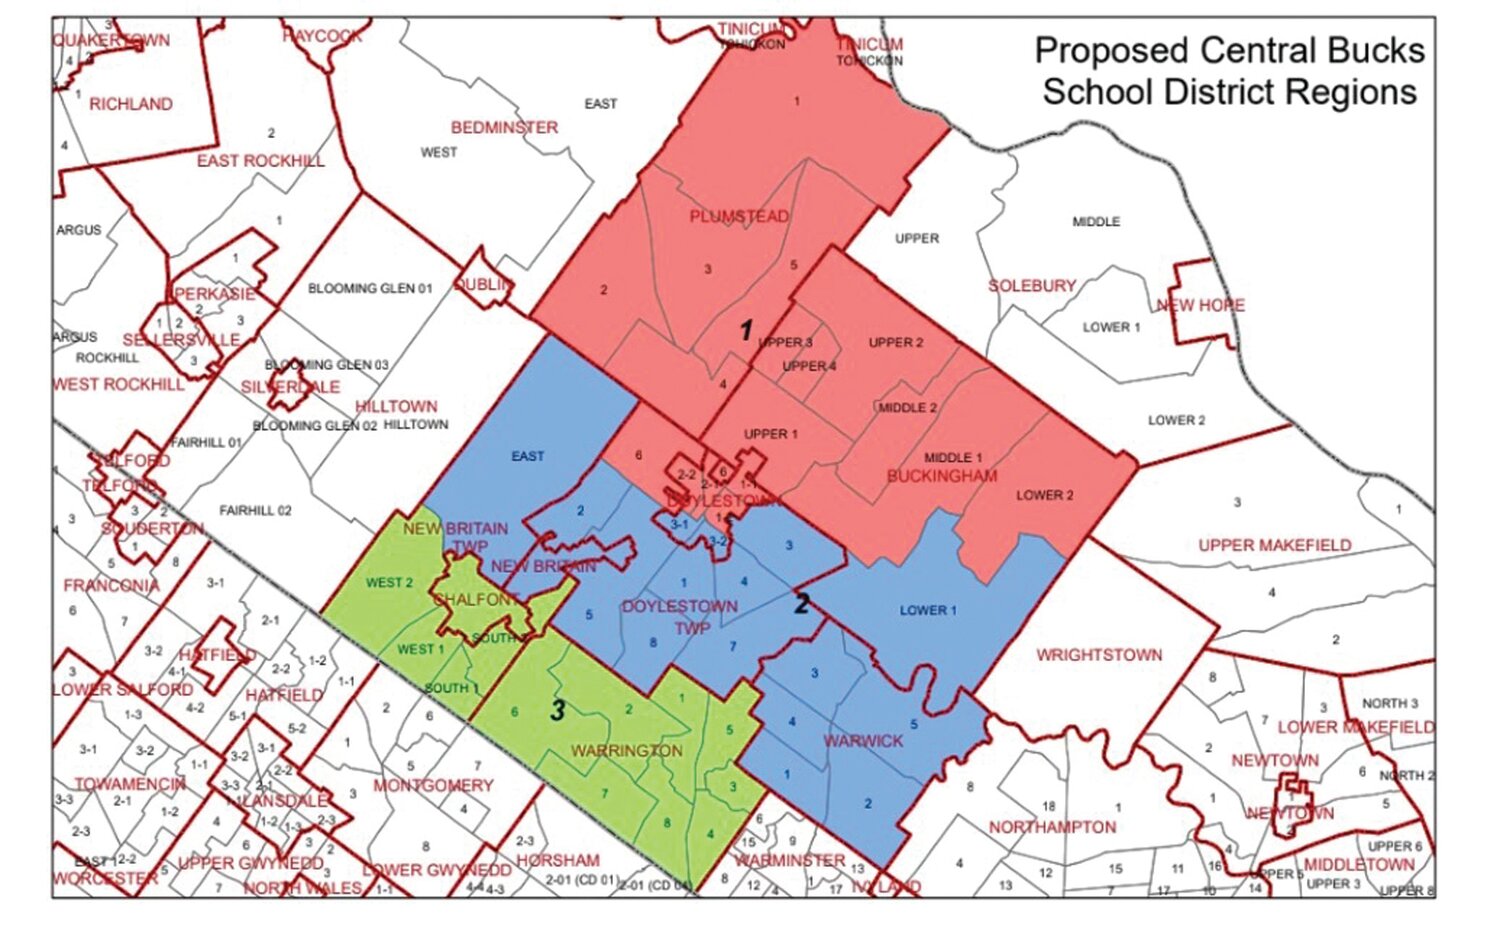 “CBSD Fair Votes” proposed a map with three Central Bucks School District voting regions, each electing three school board members.